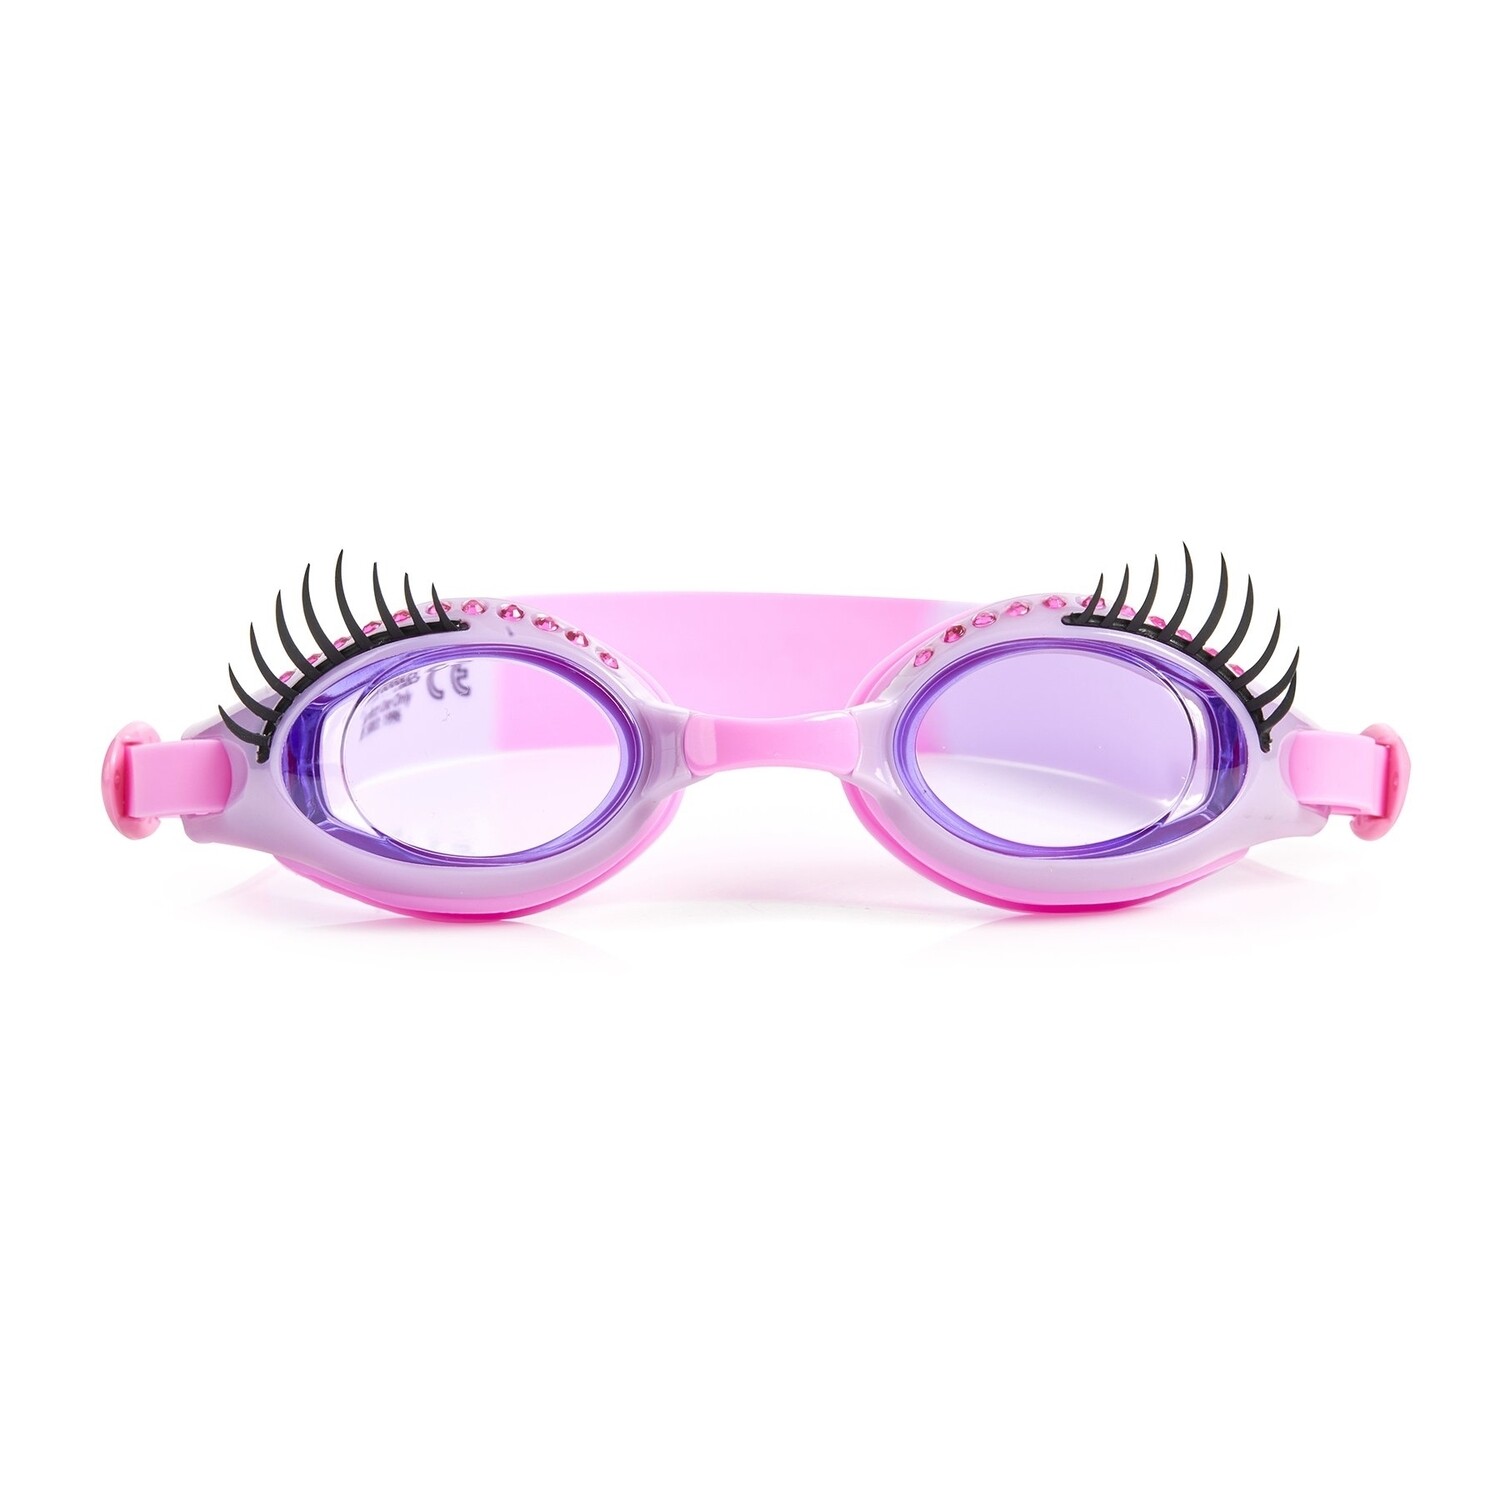 Bling2o Goggles Make Up Artise Purple Lashes